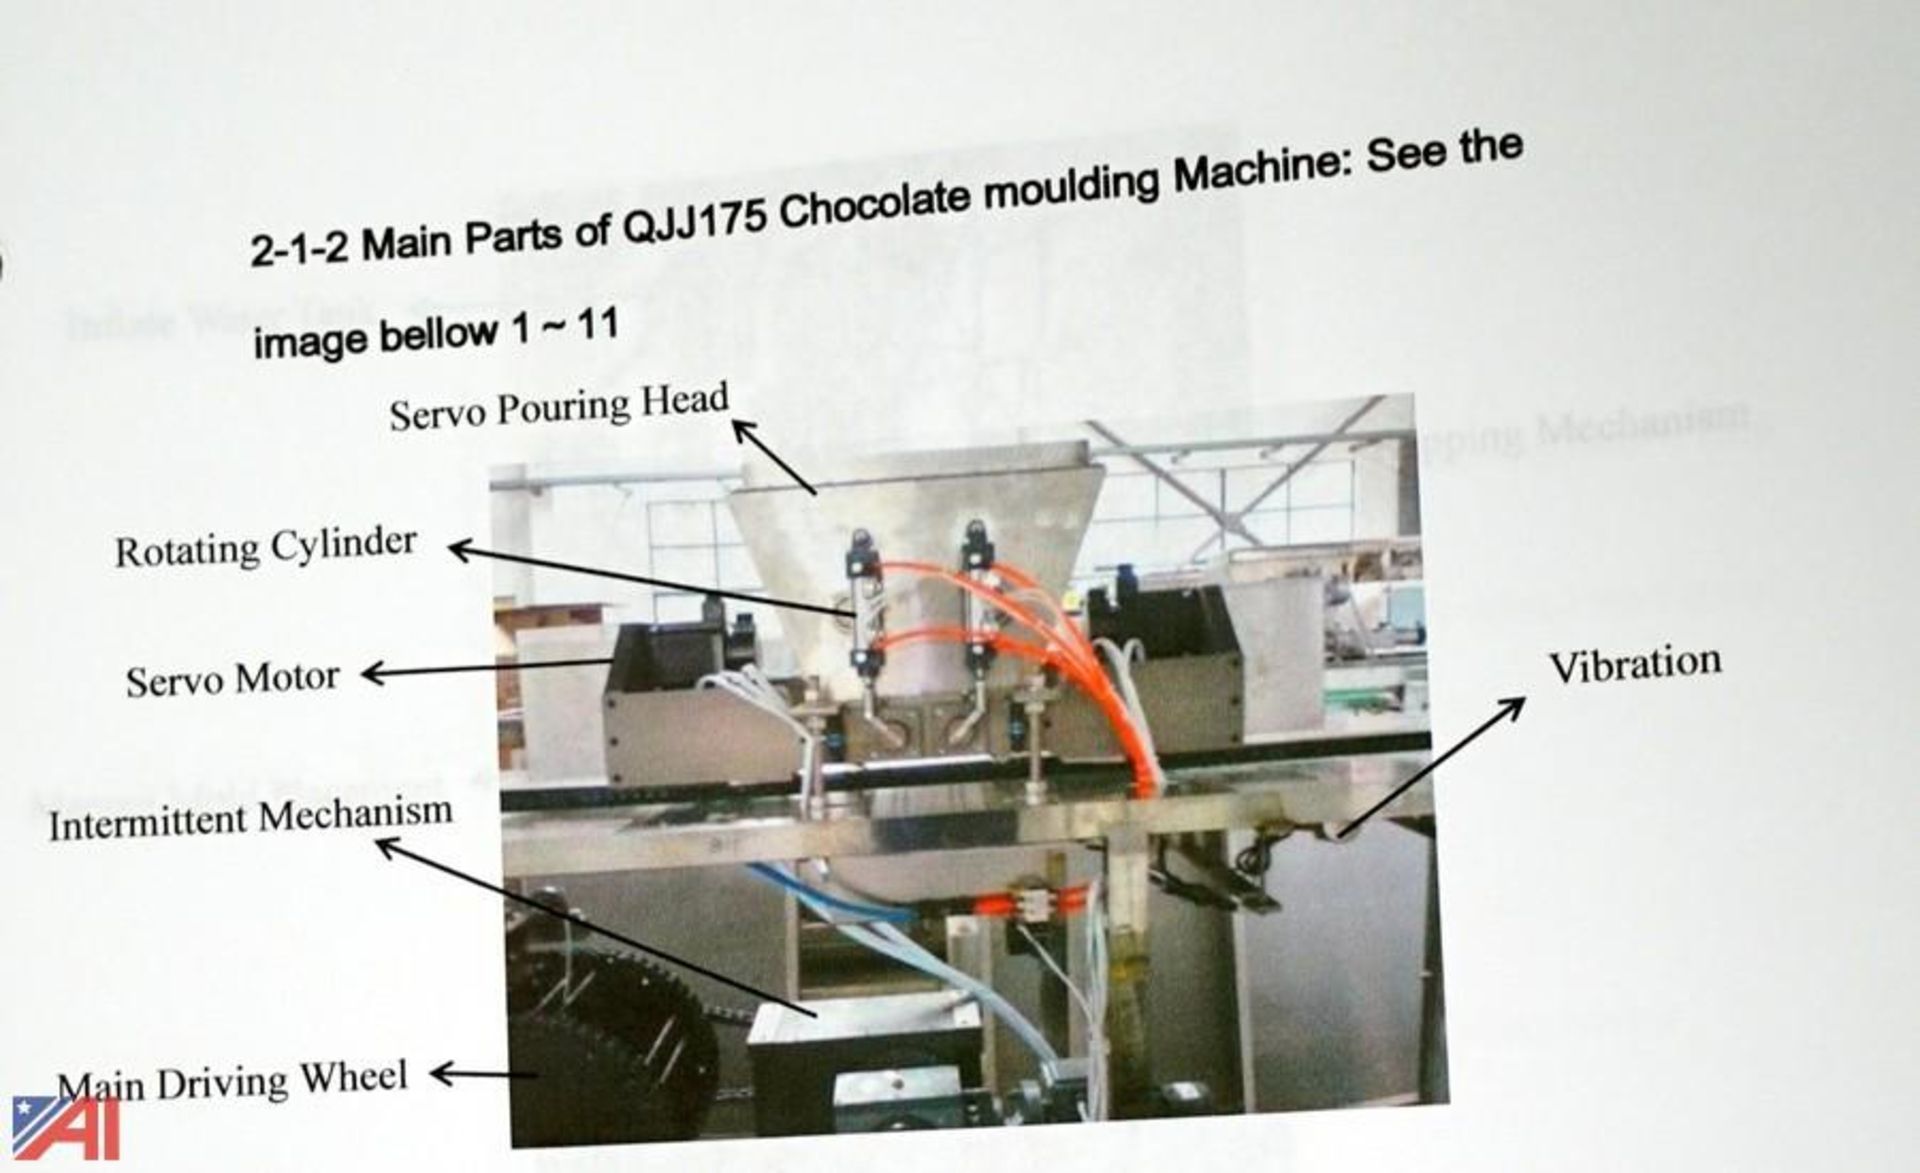 Asset 41 - Nantong Twinkle Machinery Equipment Co. One Shot Depositor Chocolate Molding Plant - Image 13 of 46